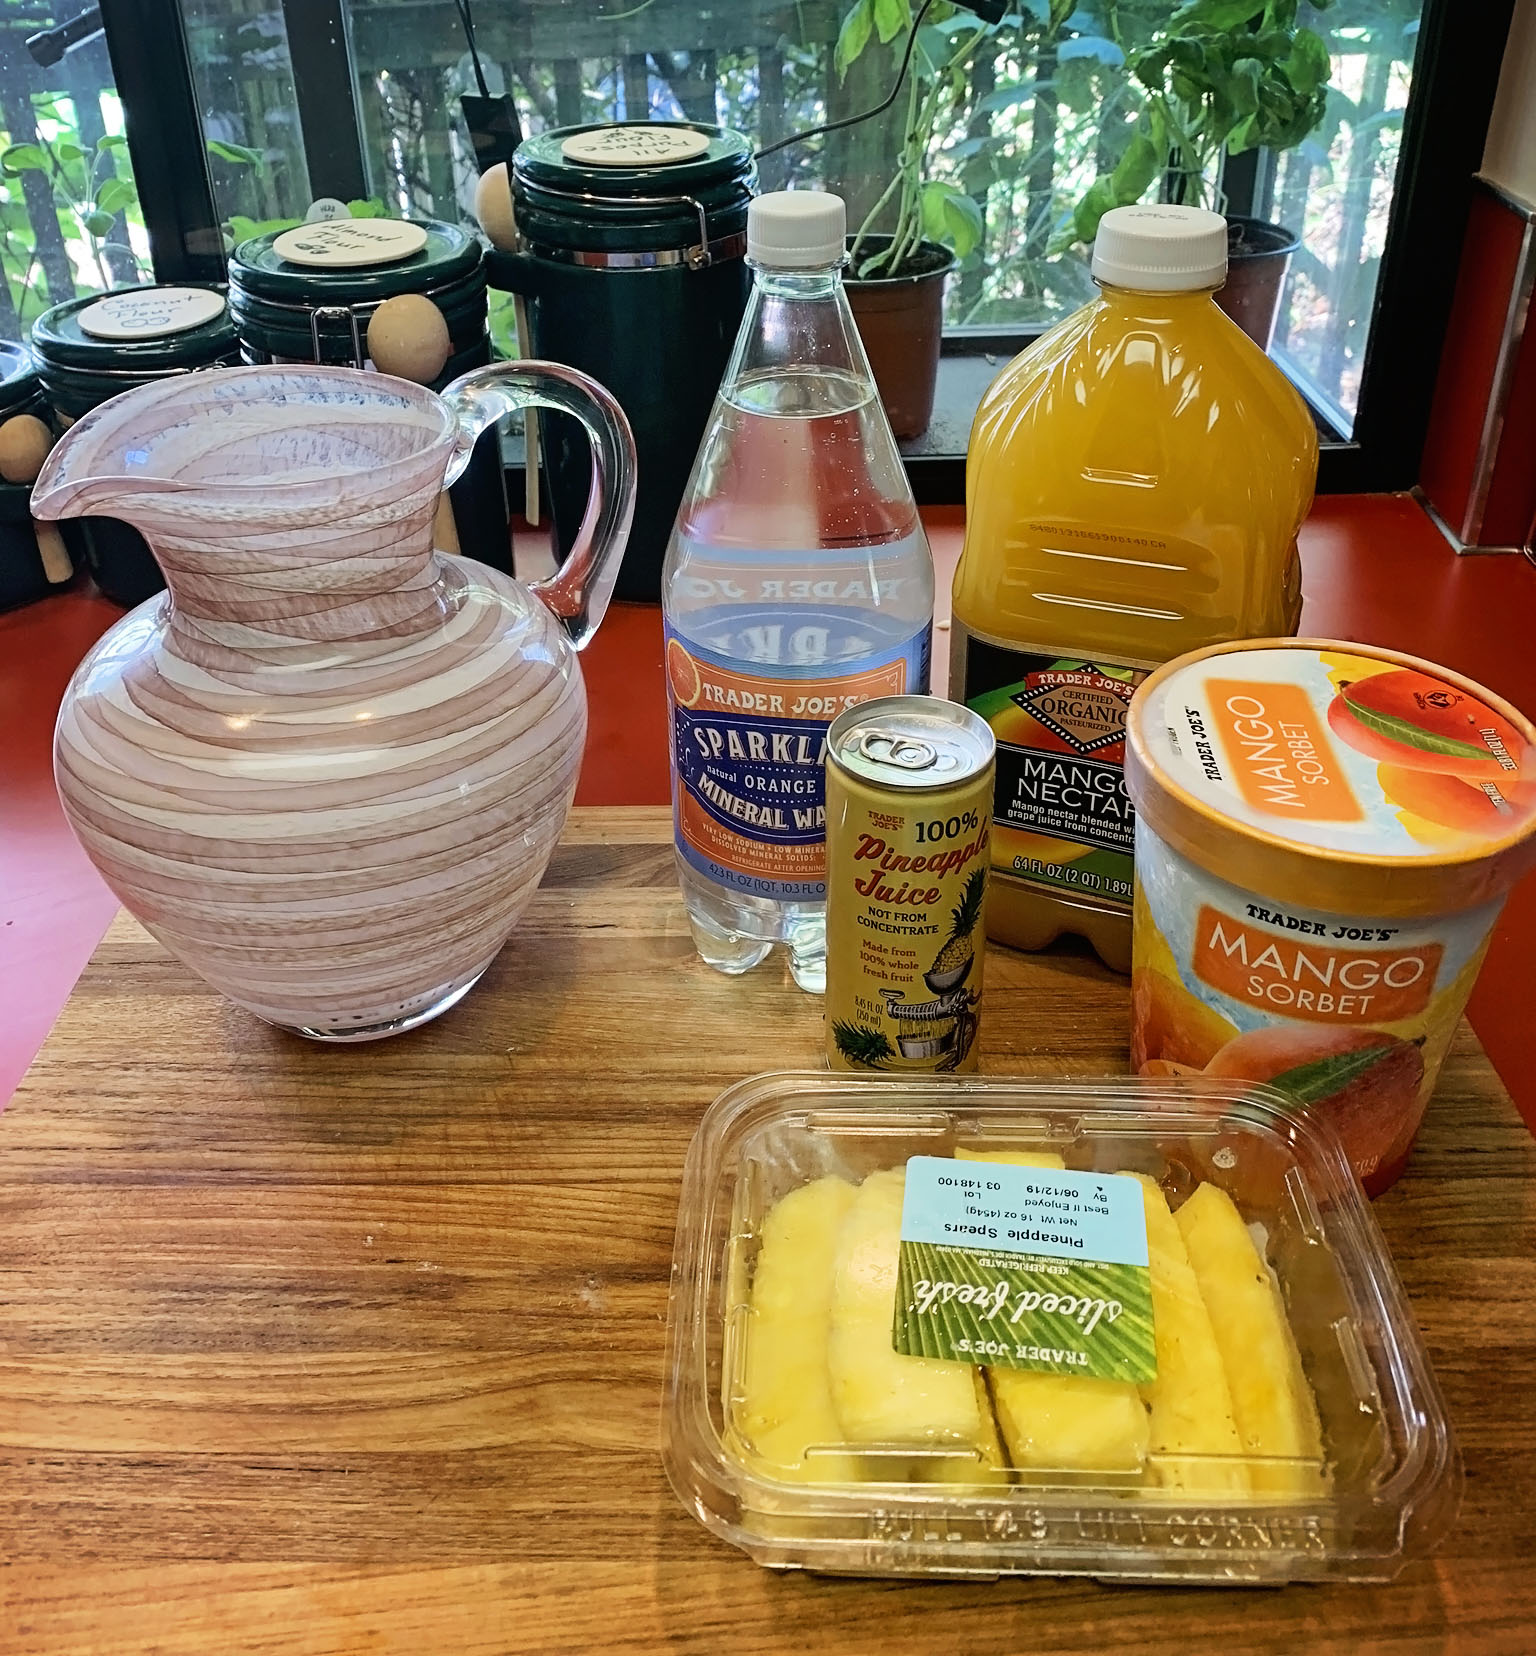 Ingredients for non-alcoholic mango and pineapple punch include Mango Nectar, Mango Sorbet, Pineapple Juice, Pineapple slices, and Sparkling Orange Mineral Water.